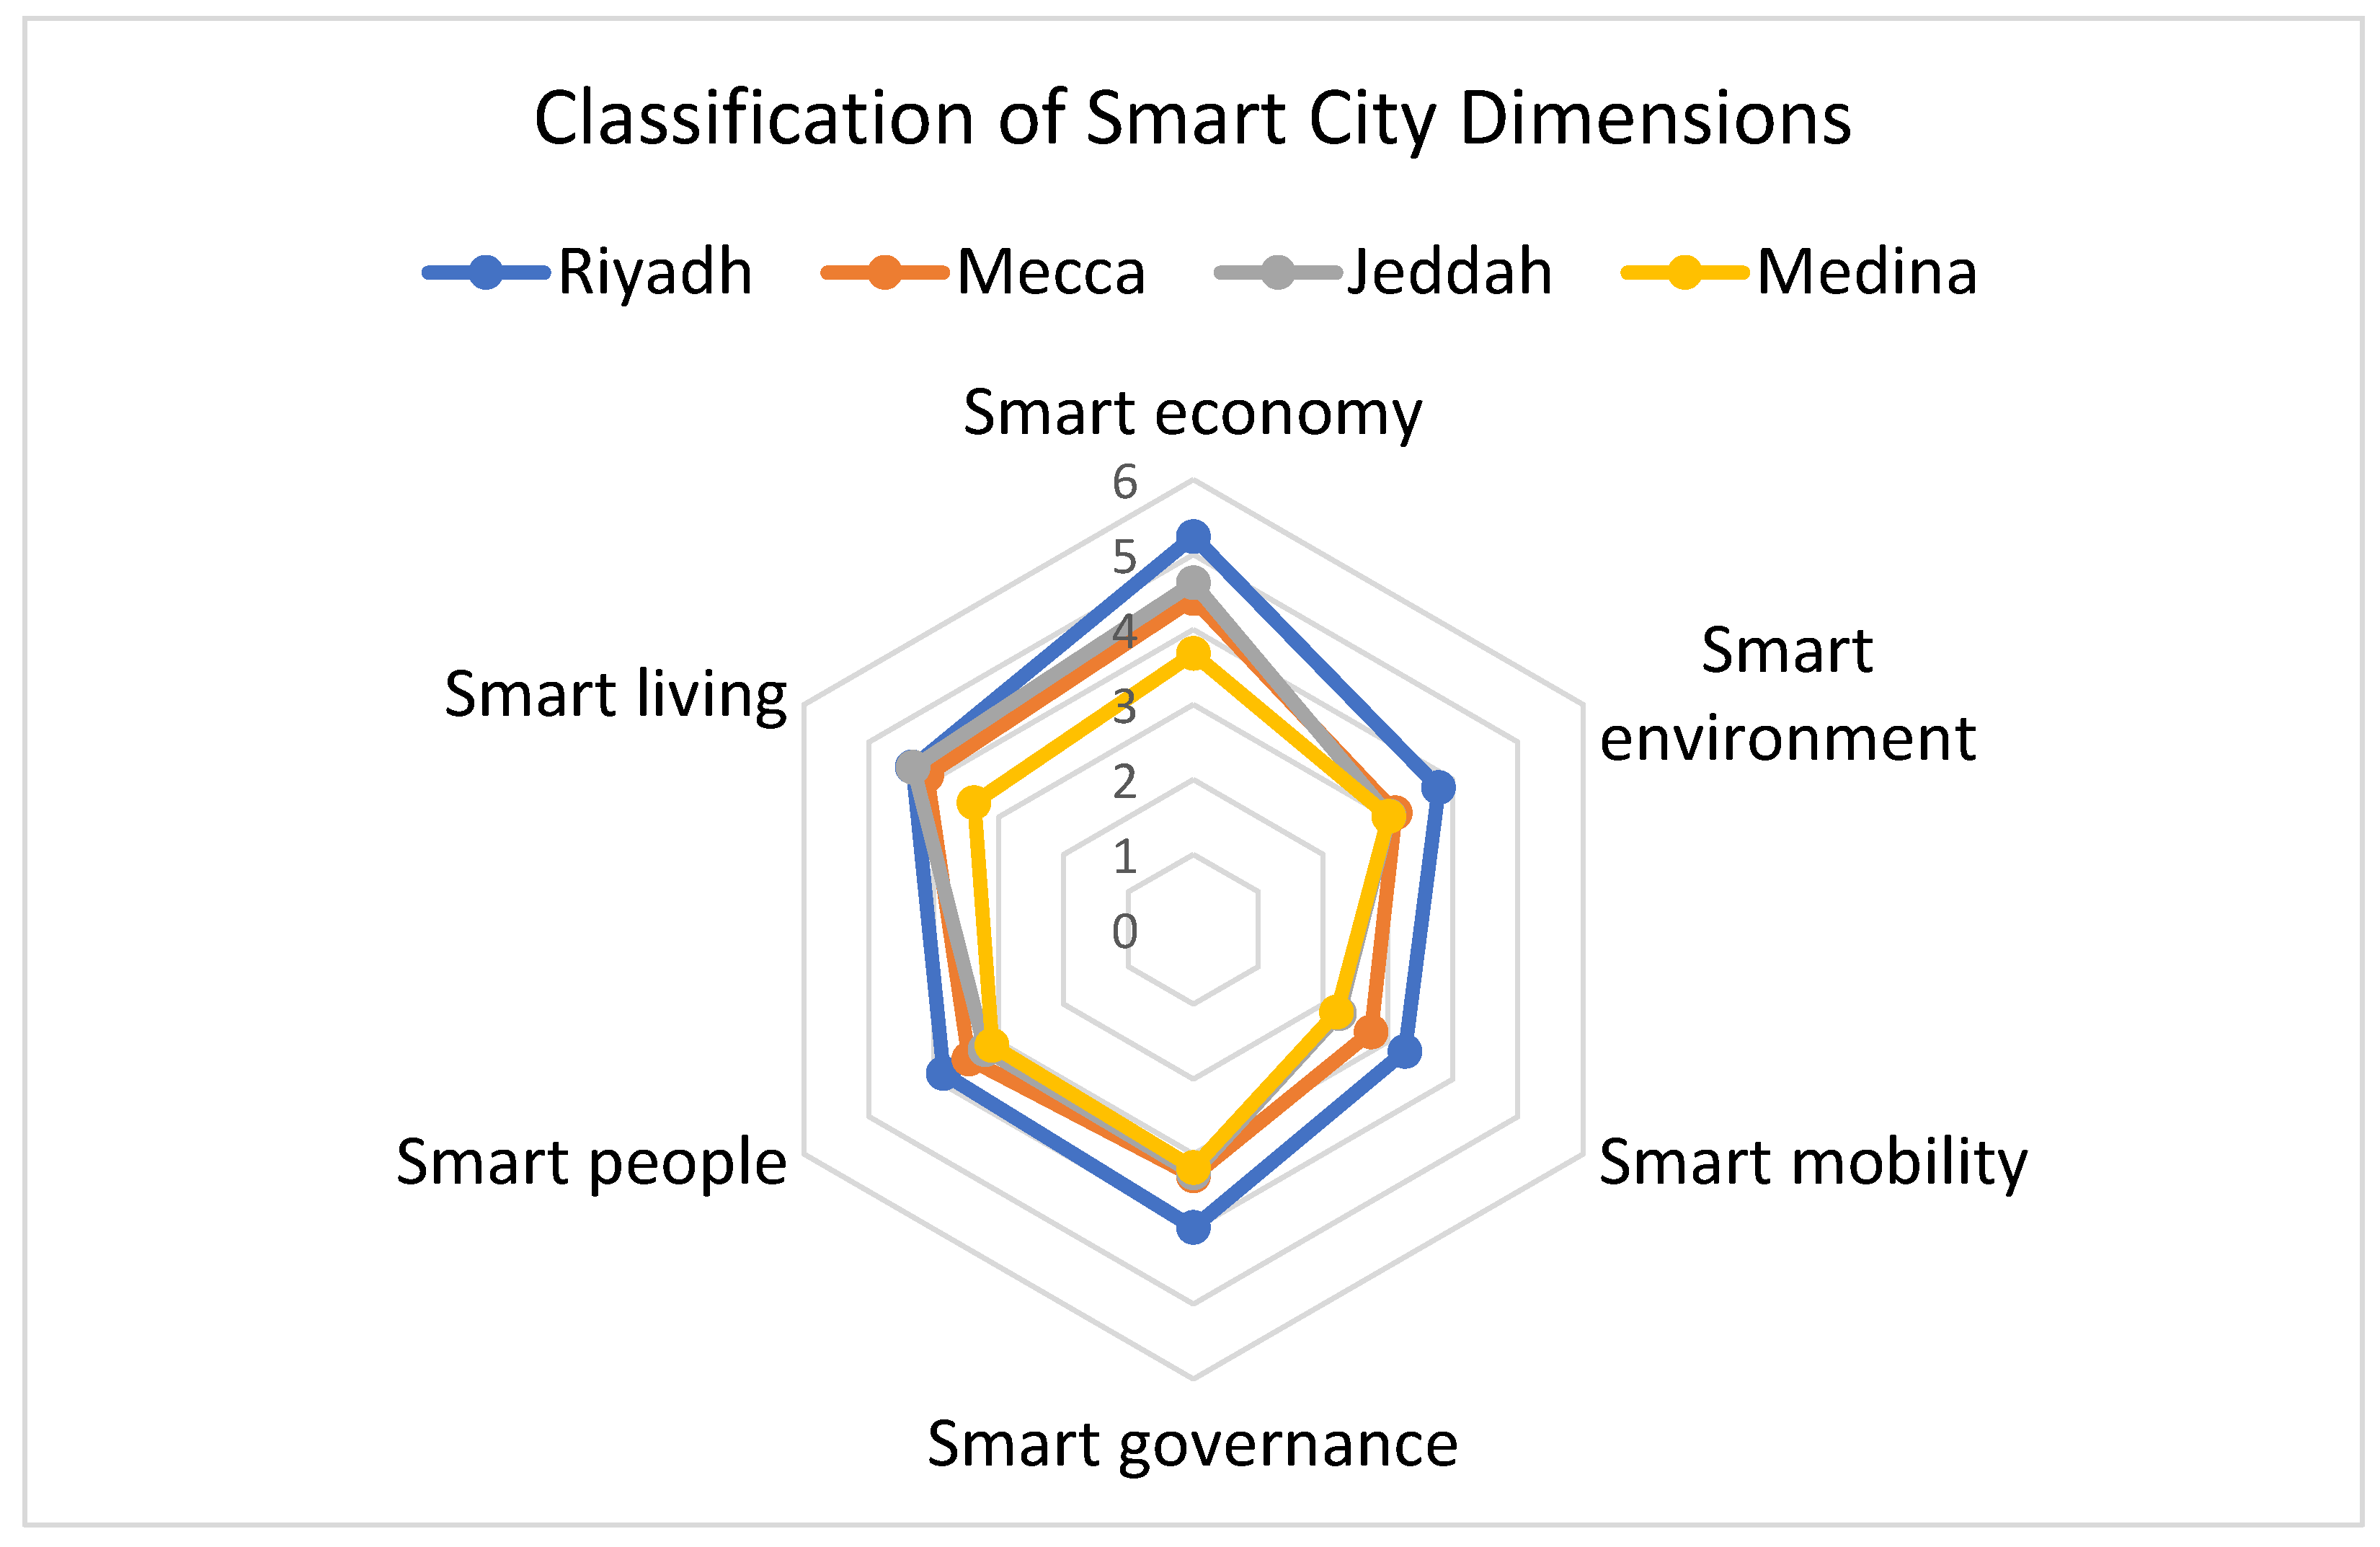 https://www.mdpi.com/smartcities/smartcities-06-00091/article_deploy/html/images/smartcities-06-00091-g001.png